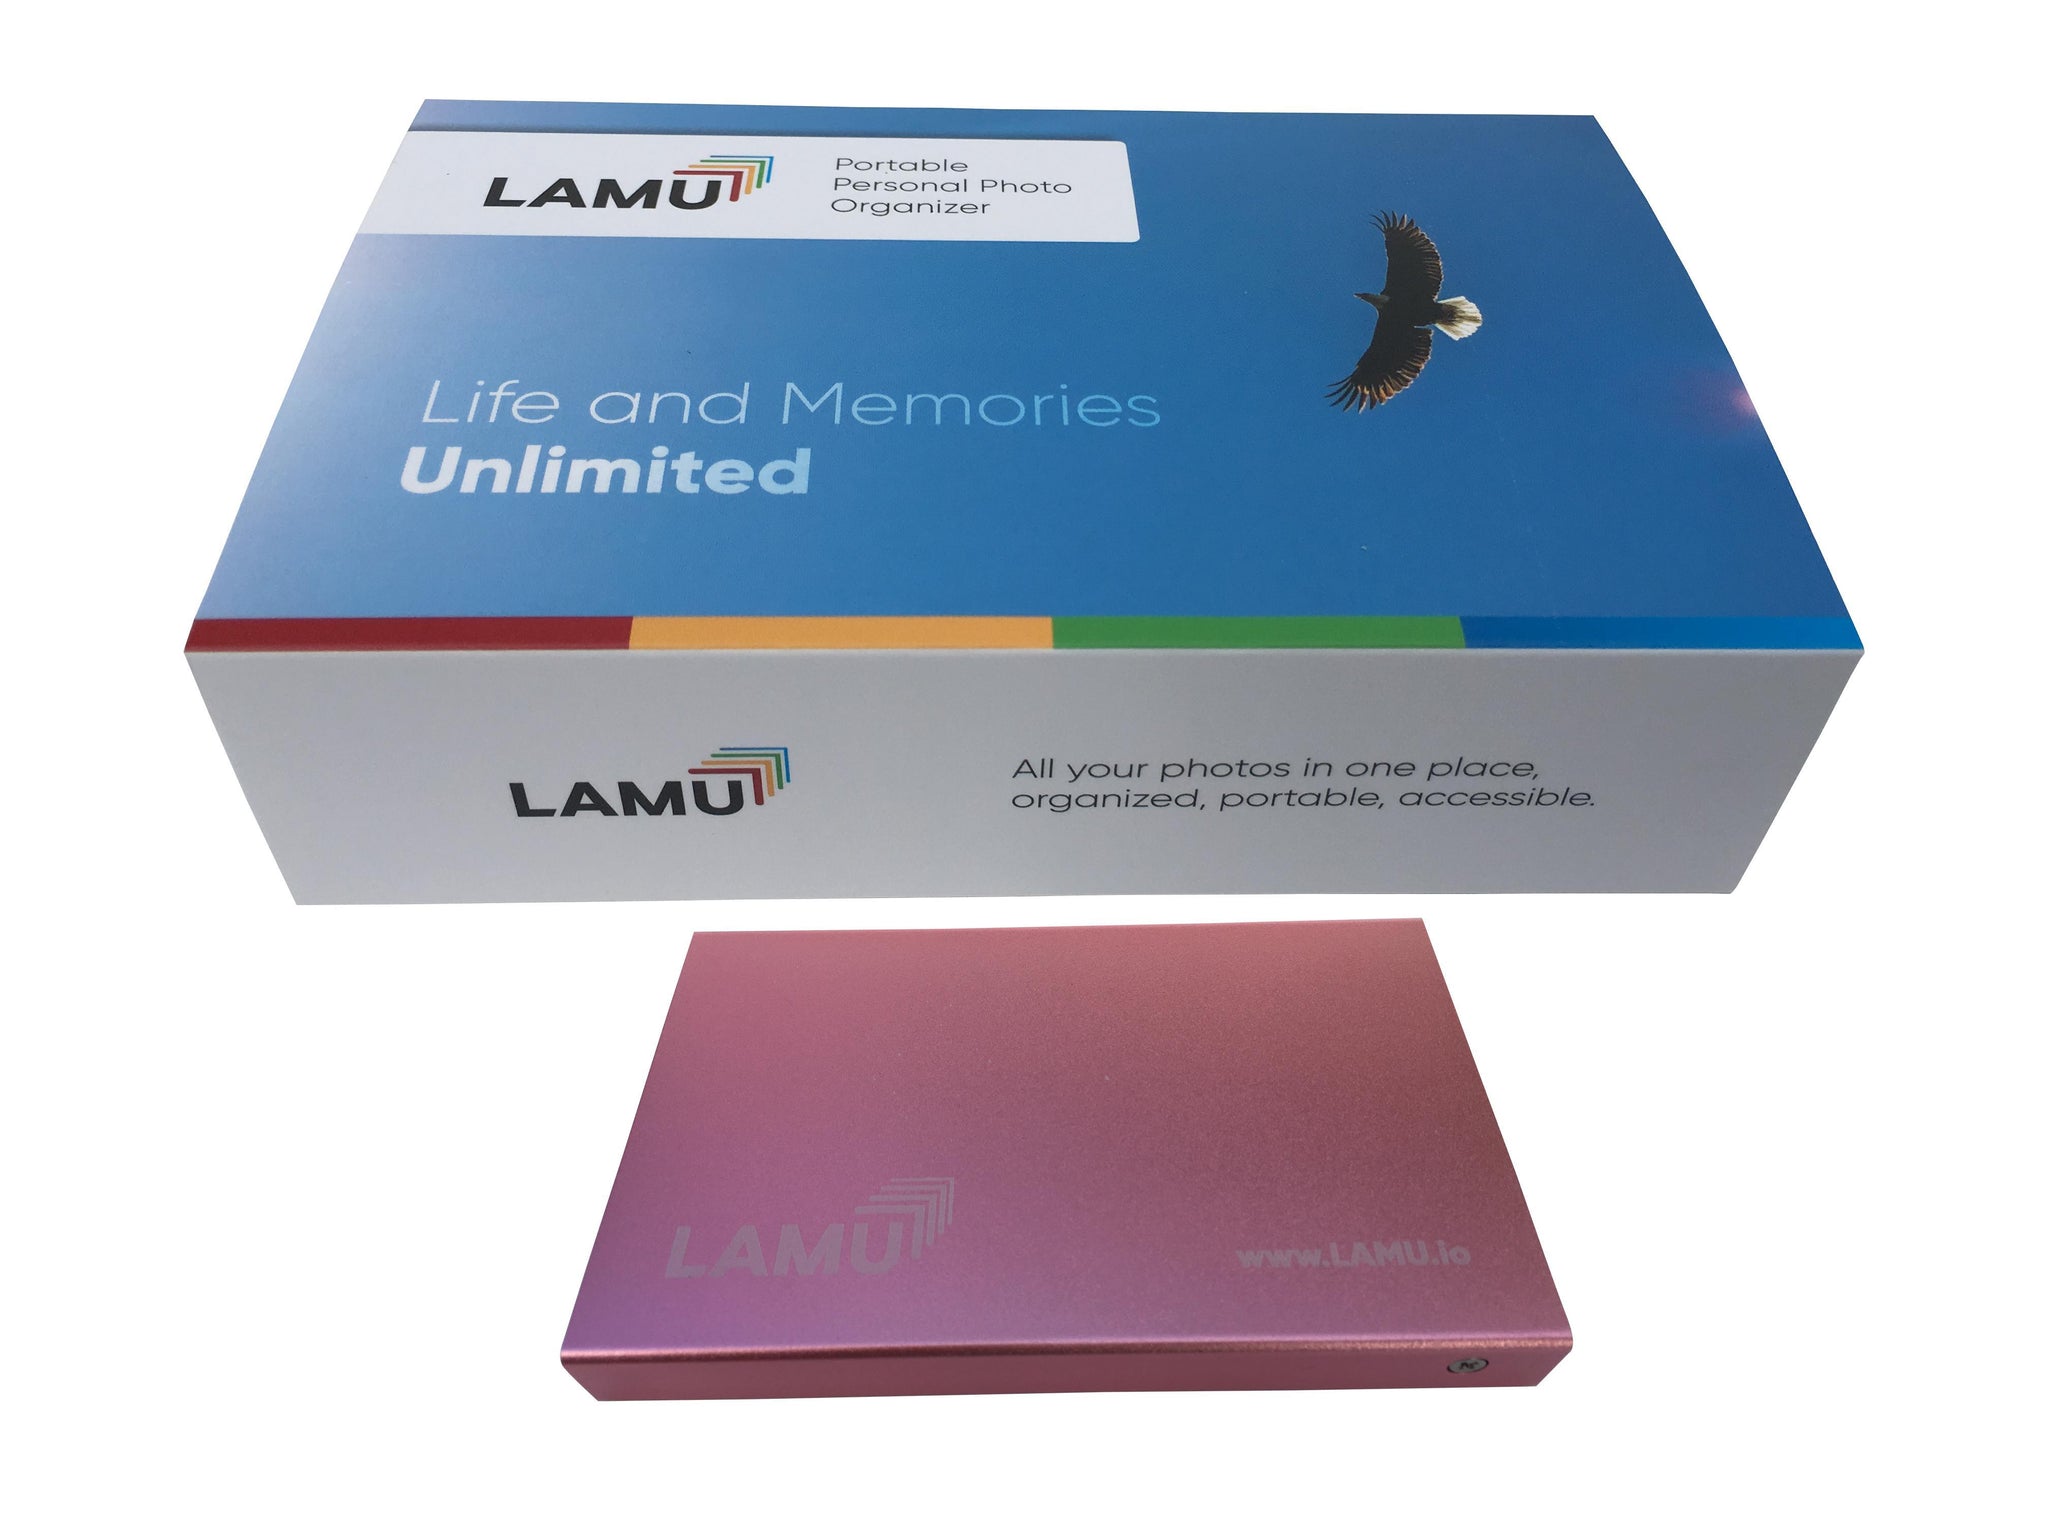 LAMU Portable Photo Organizer 1TB Rose Gold for Windows. All your phot –  Life and Memories Unlimited